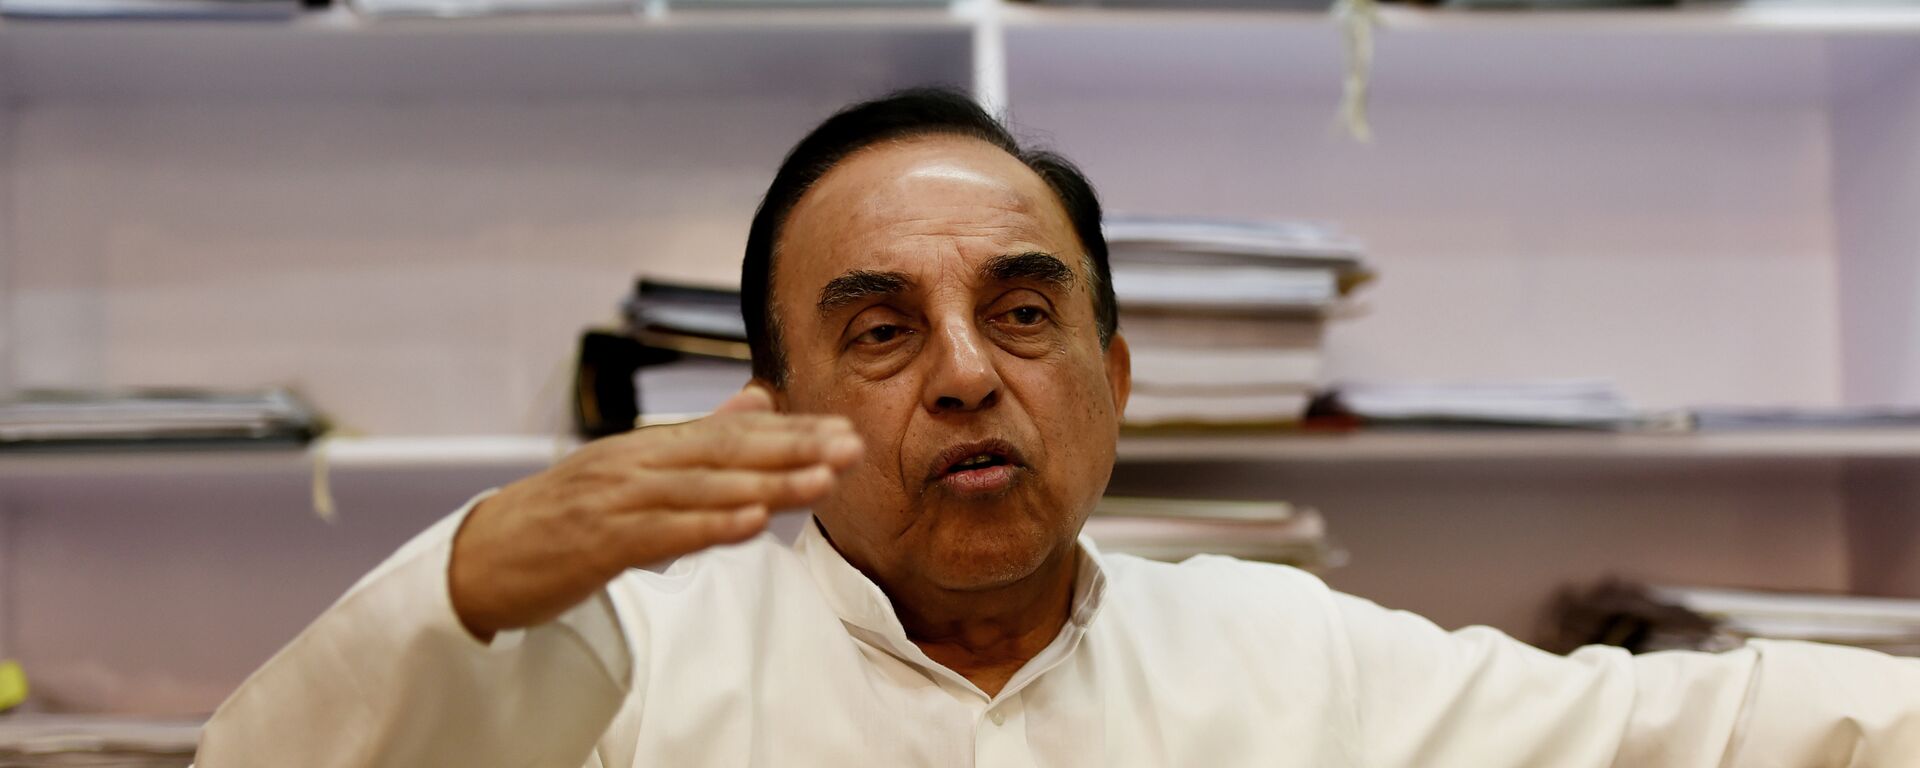 In this photograph taken on May 9, 2016, Subramanian Swamy, an Indian politician and a member of the Rajya Sabha, the upper house of the Indian parliament, gestures during an interview with AFP in New Delhi - Sputnik International, 1920, 16.12.2021